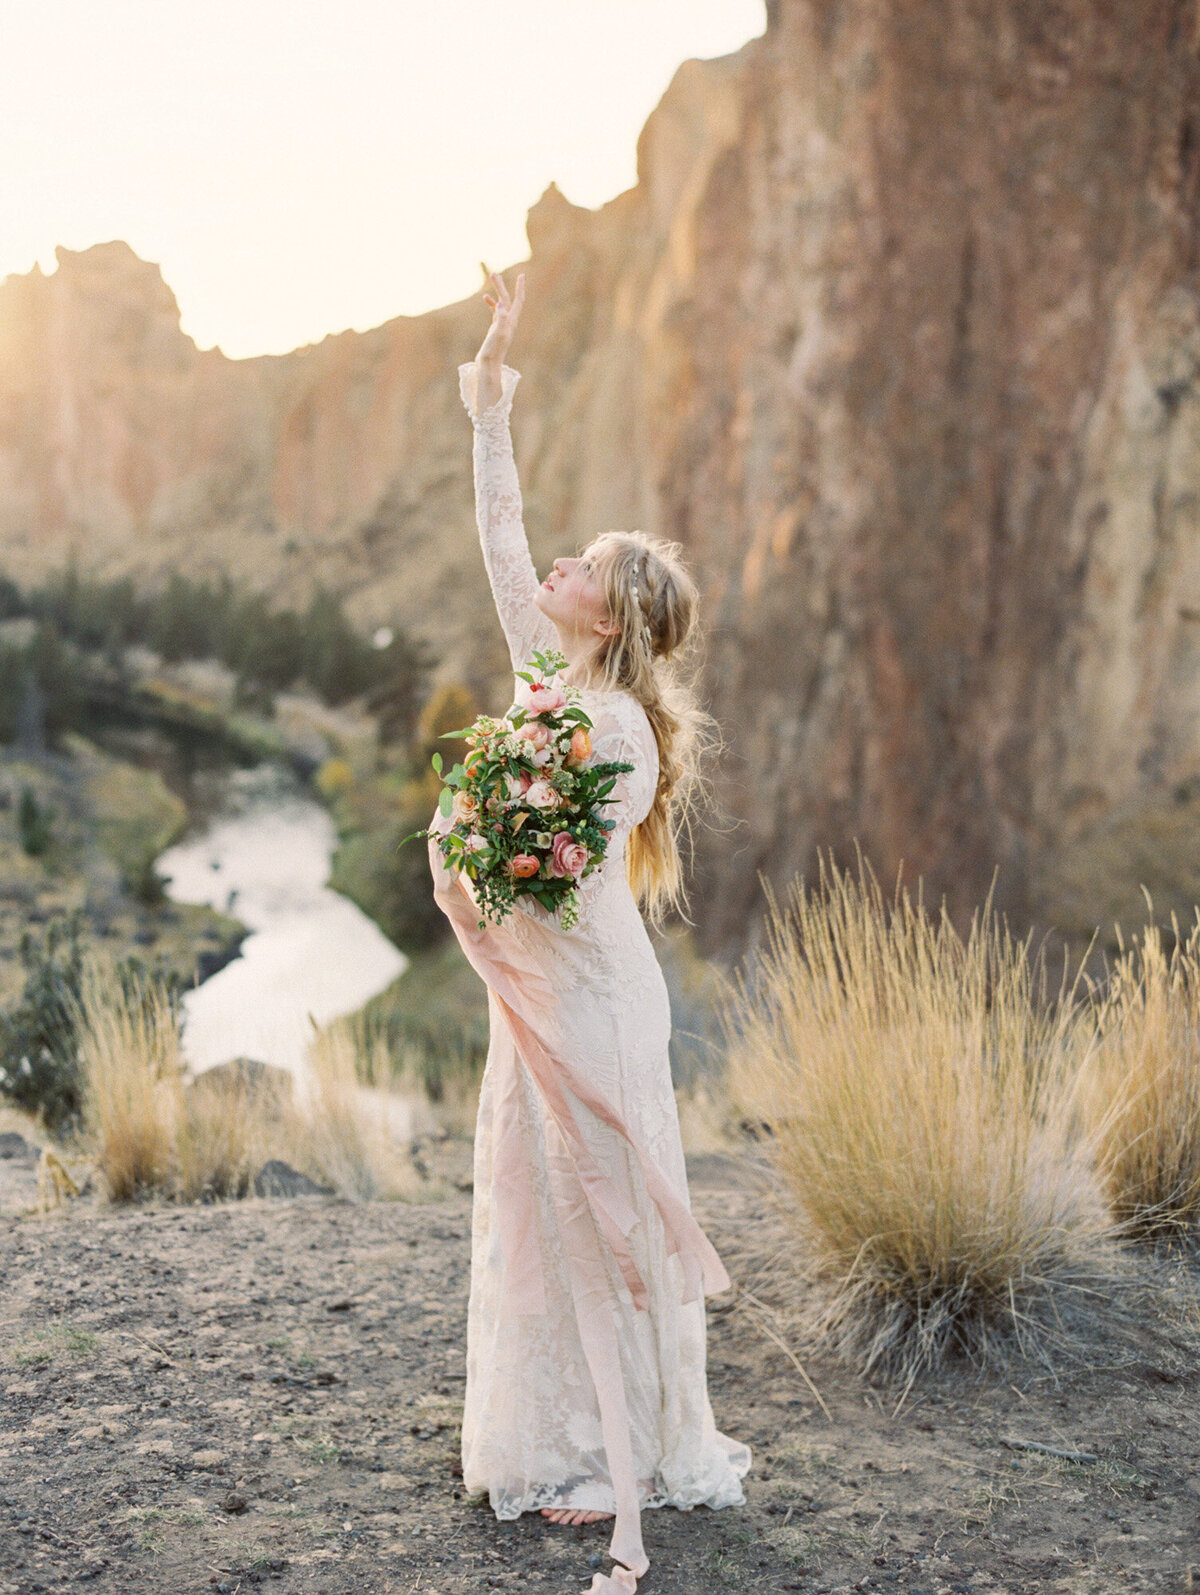 A bride in light pink wedding attire holds a bouquet and raises her arm to the sky in a canyon.